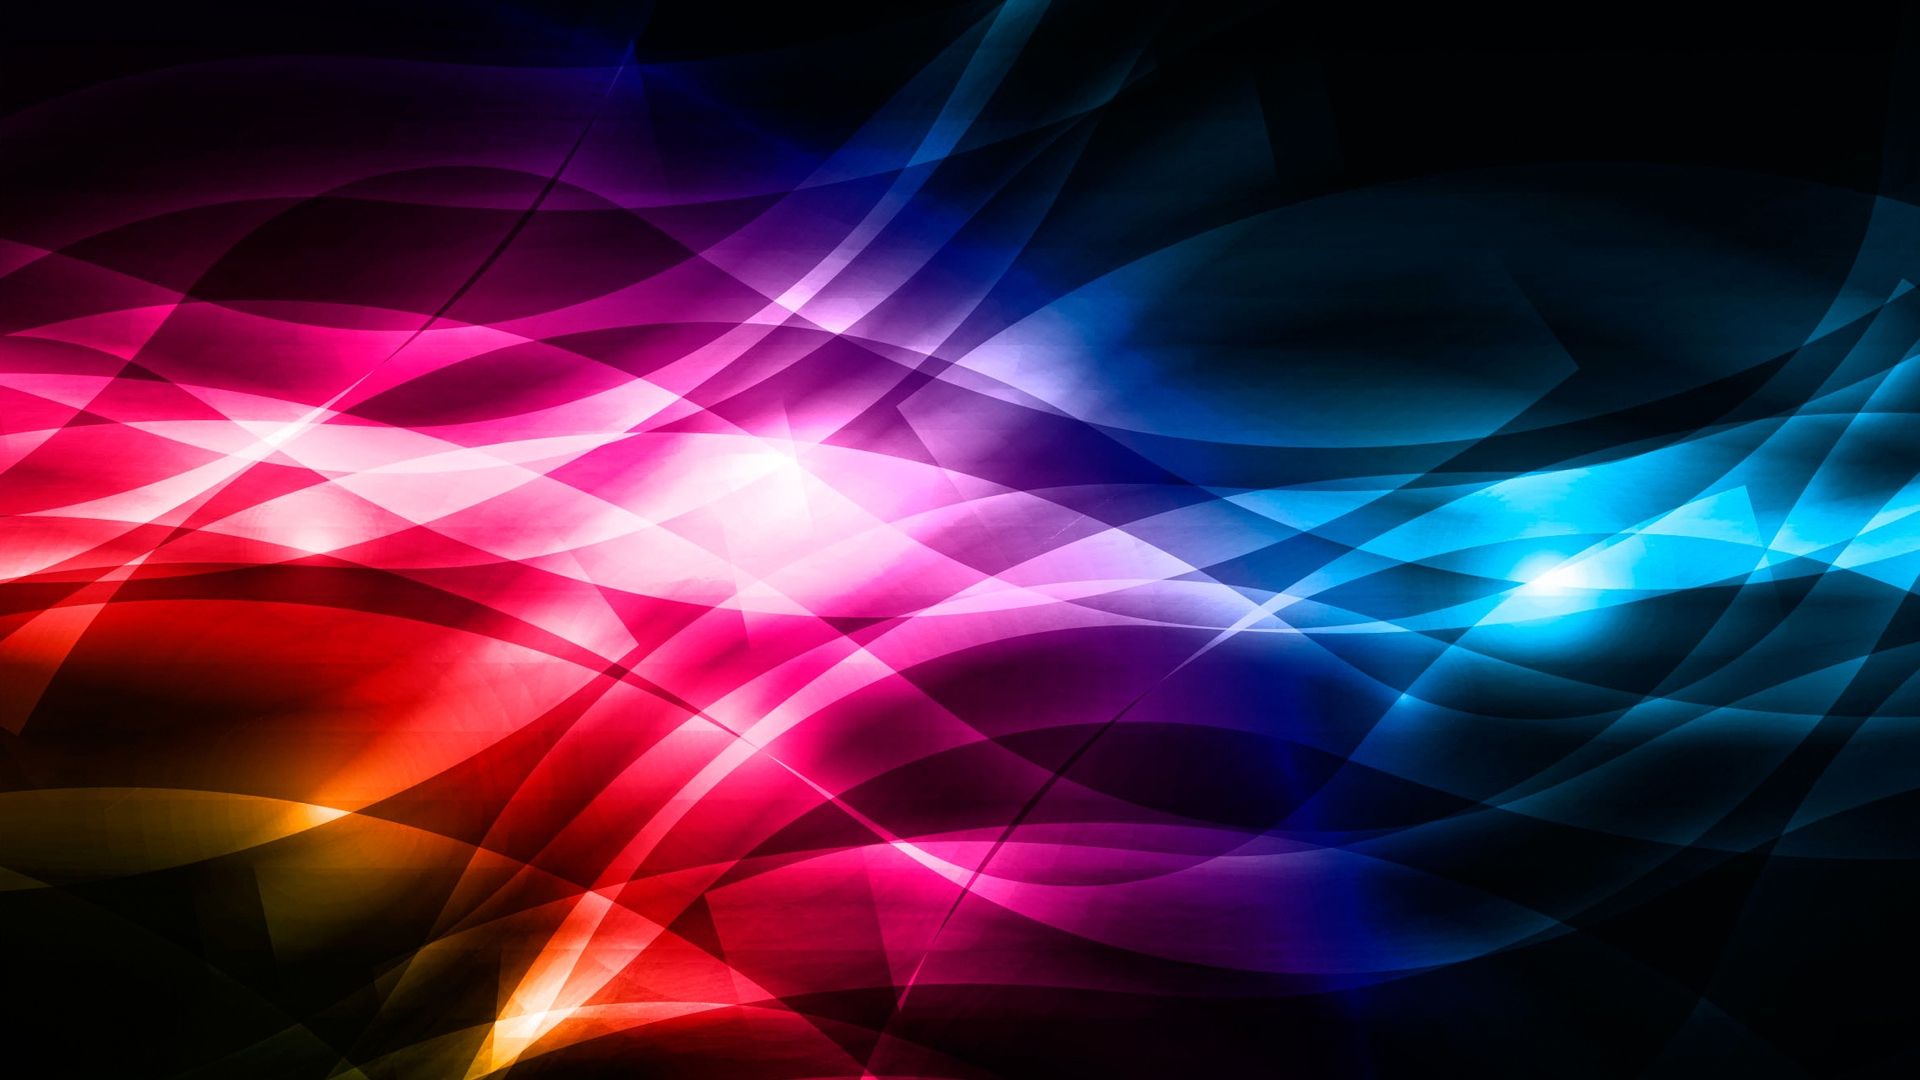 3D Color Wallpapers